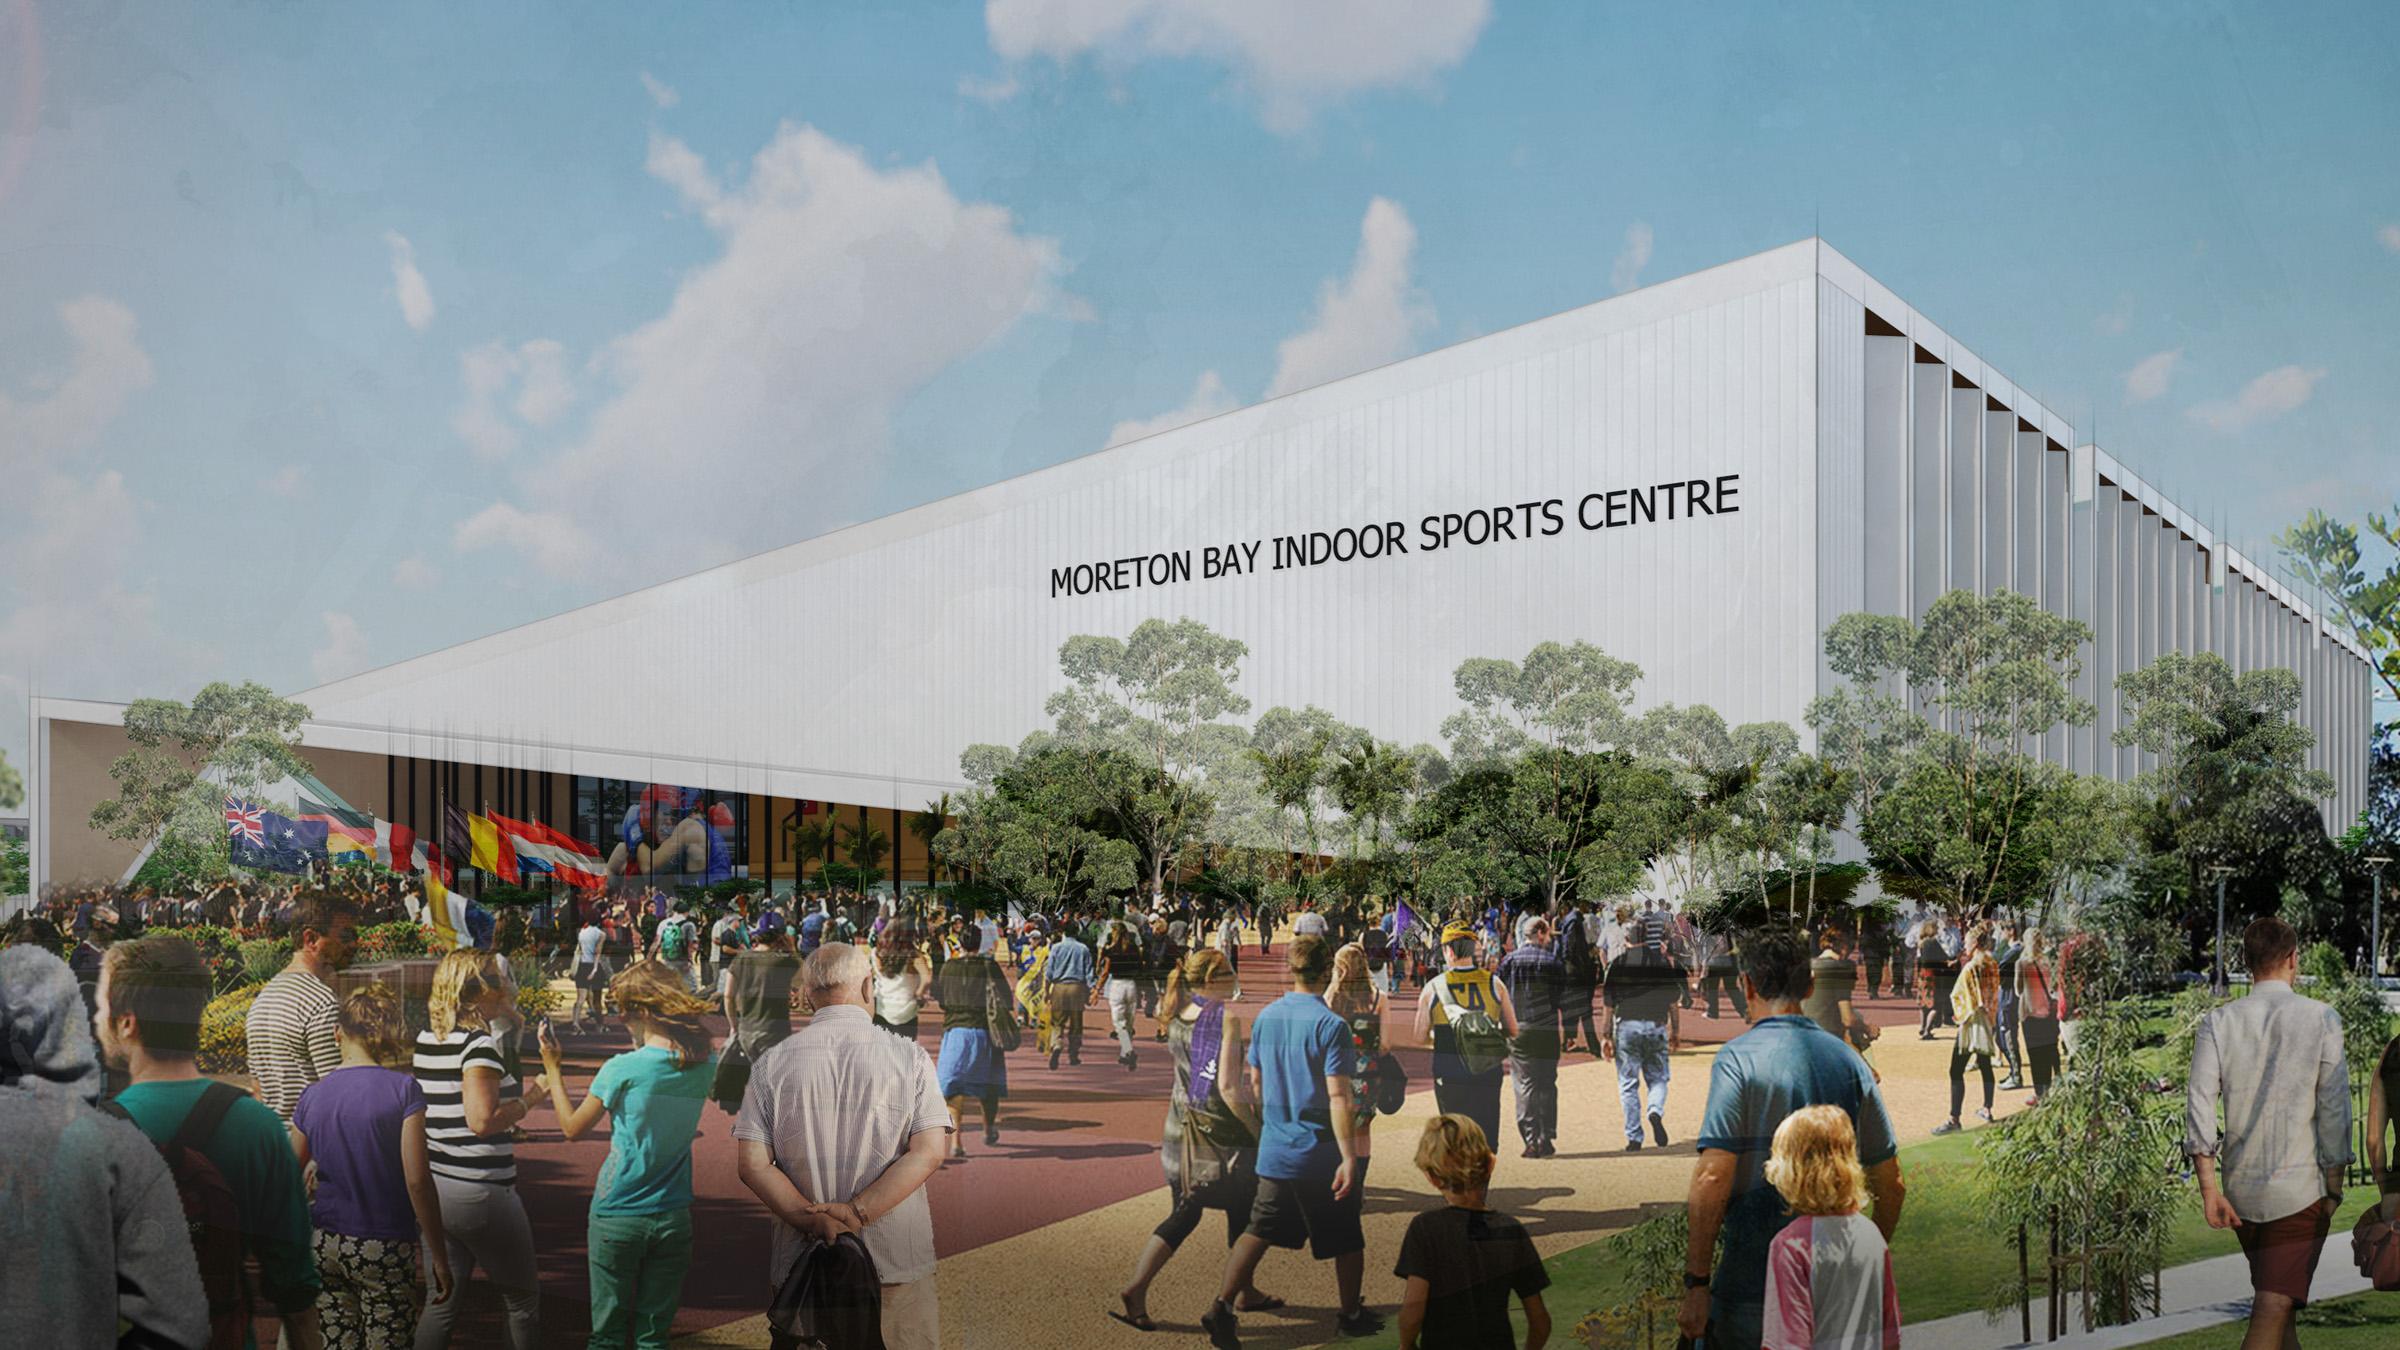 Computer-render of Moreton Bay Indoor sports centre, with crowds of people walking in